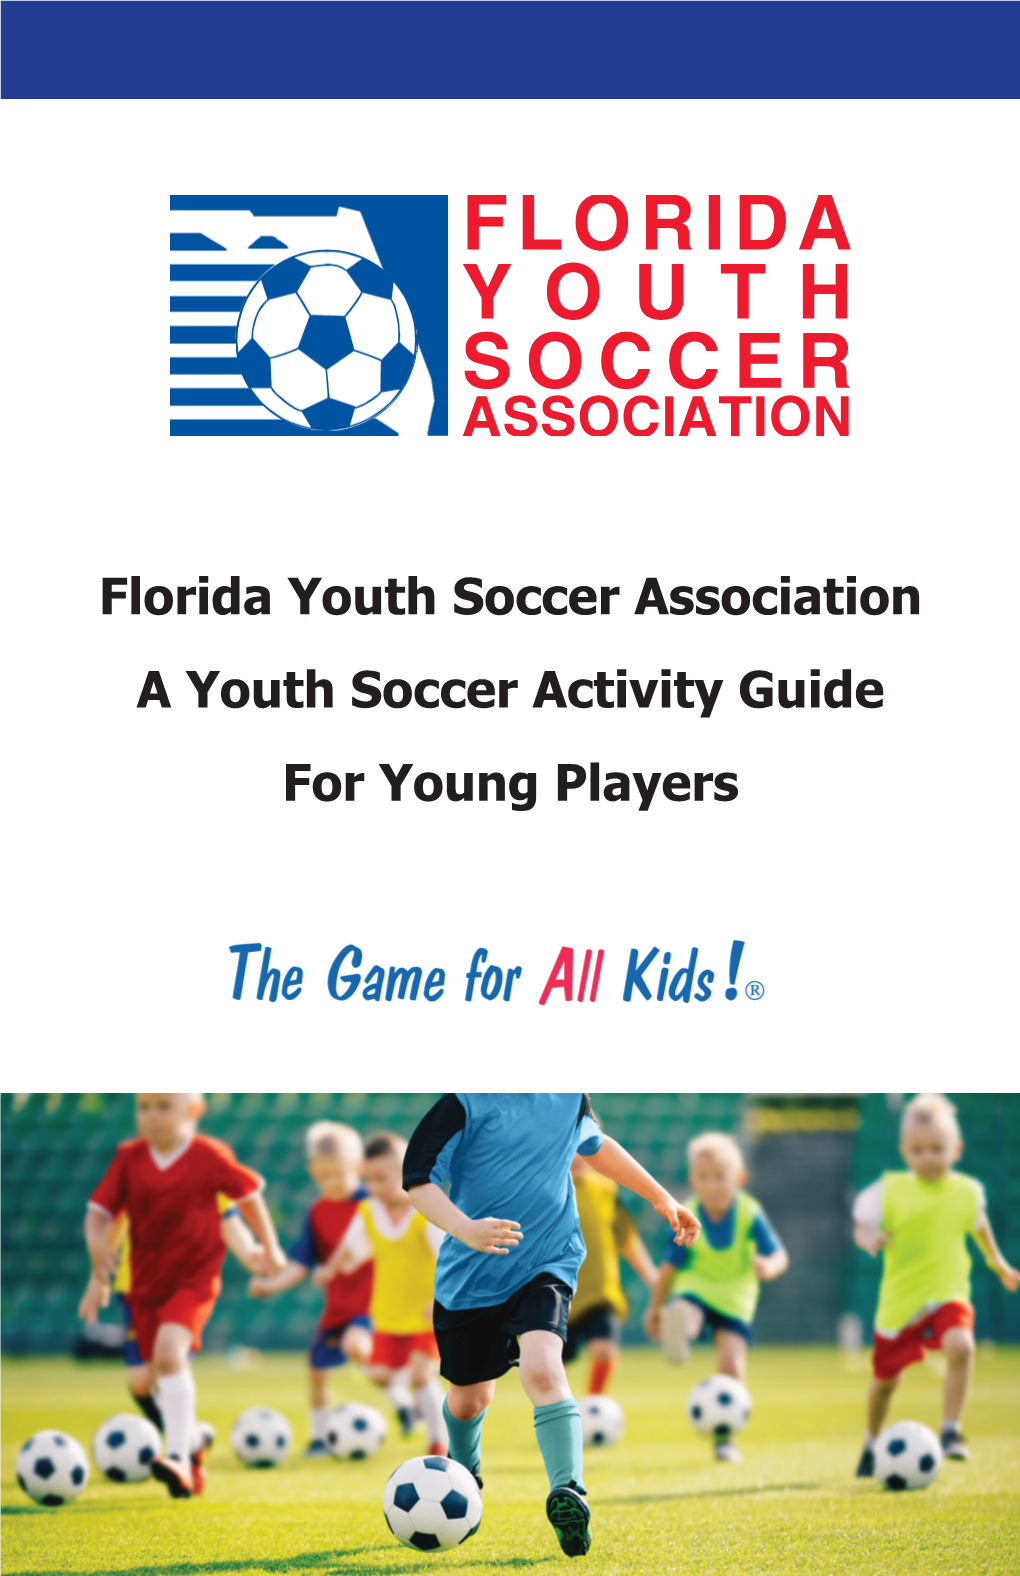 Florida Youth Soccer Association a Youth Soccer Activity Guide For